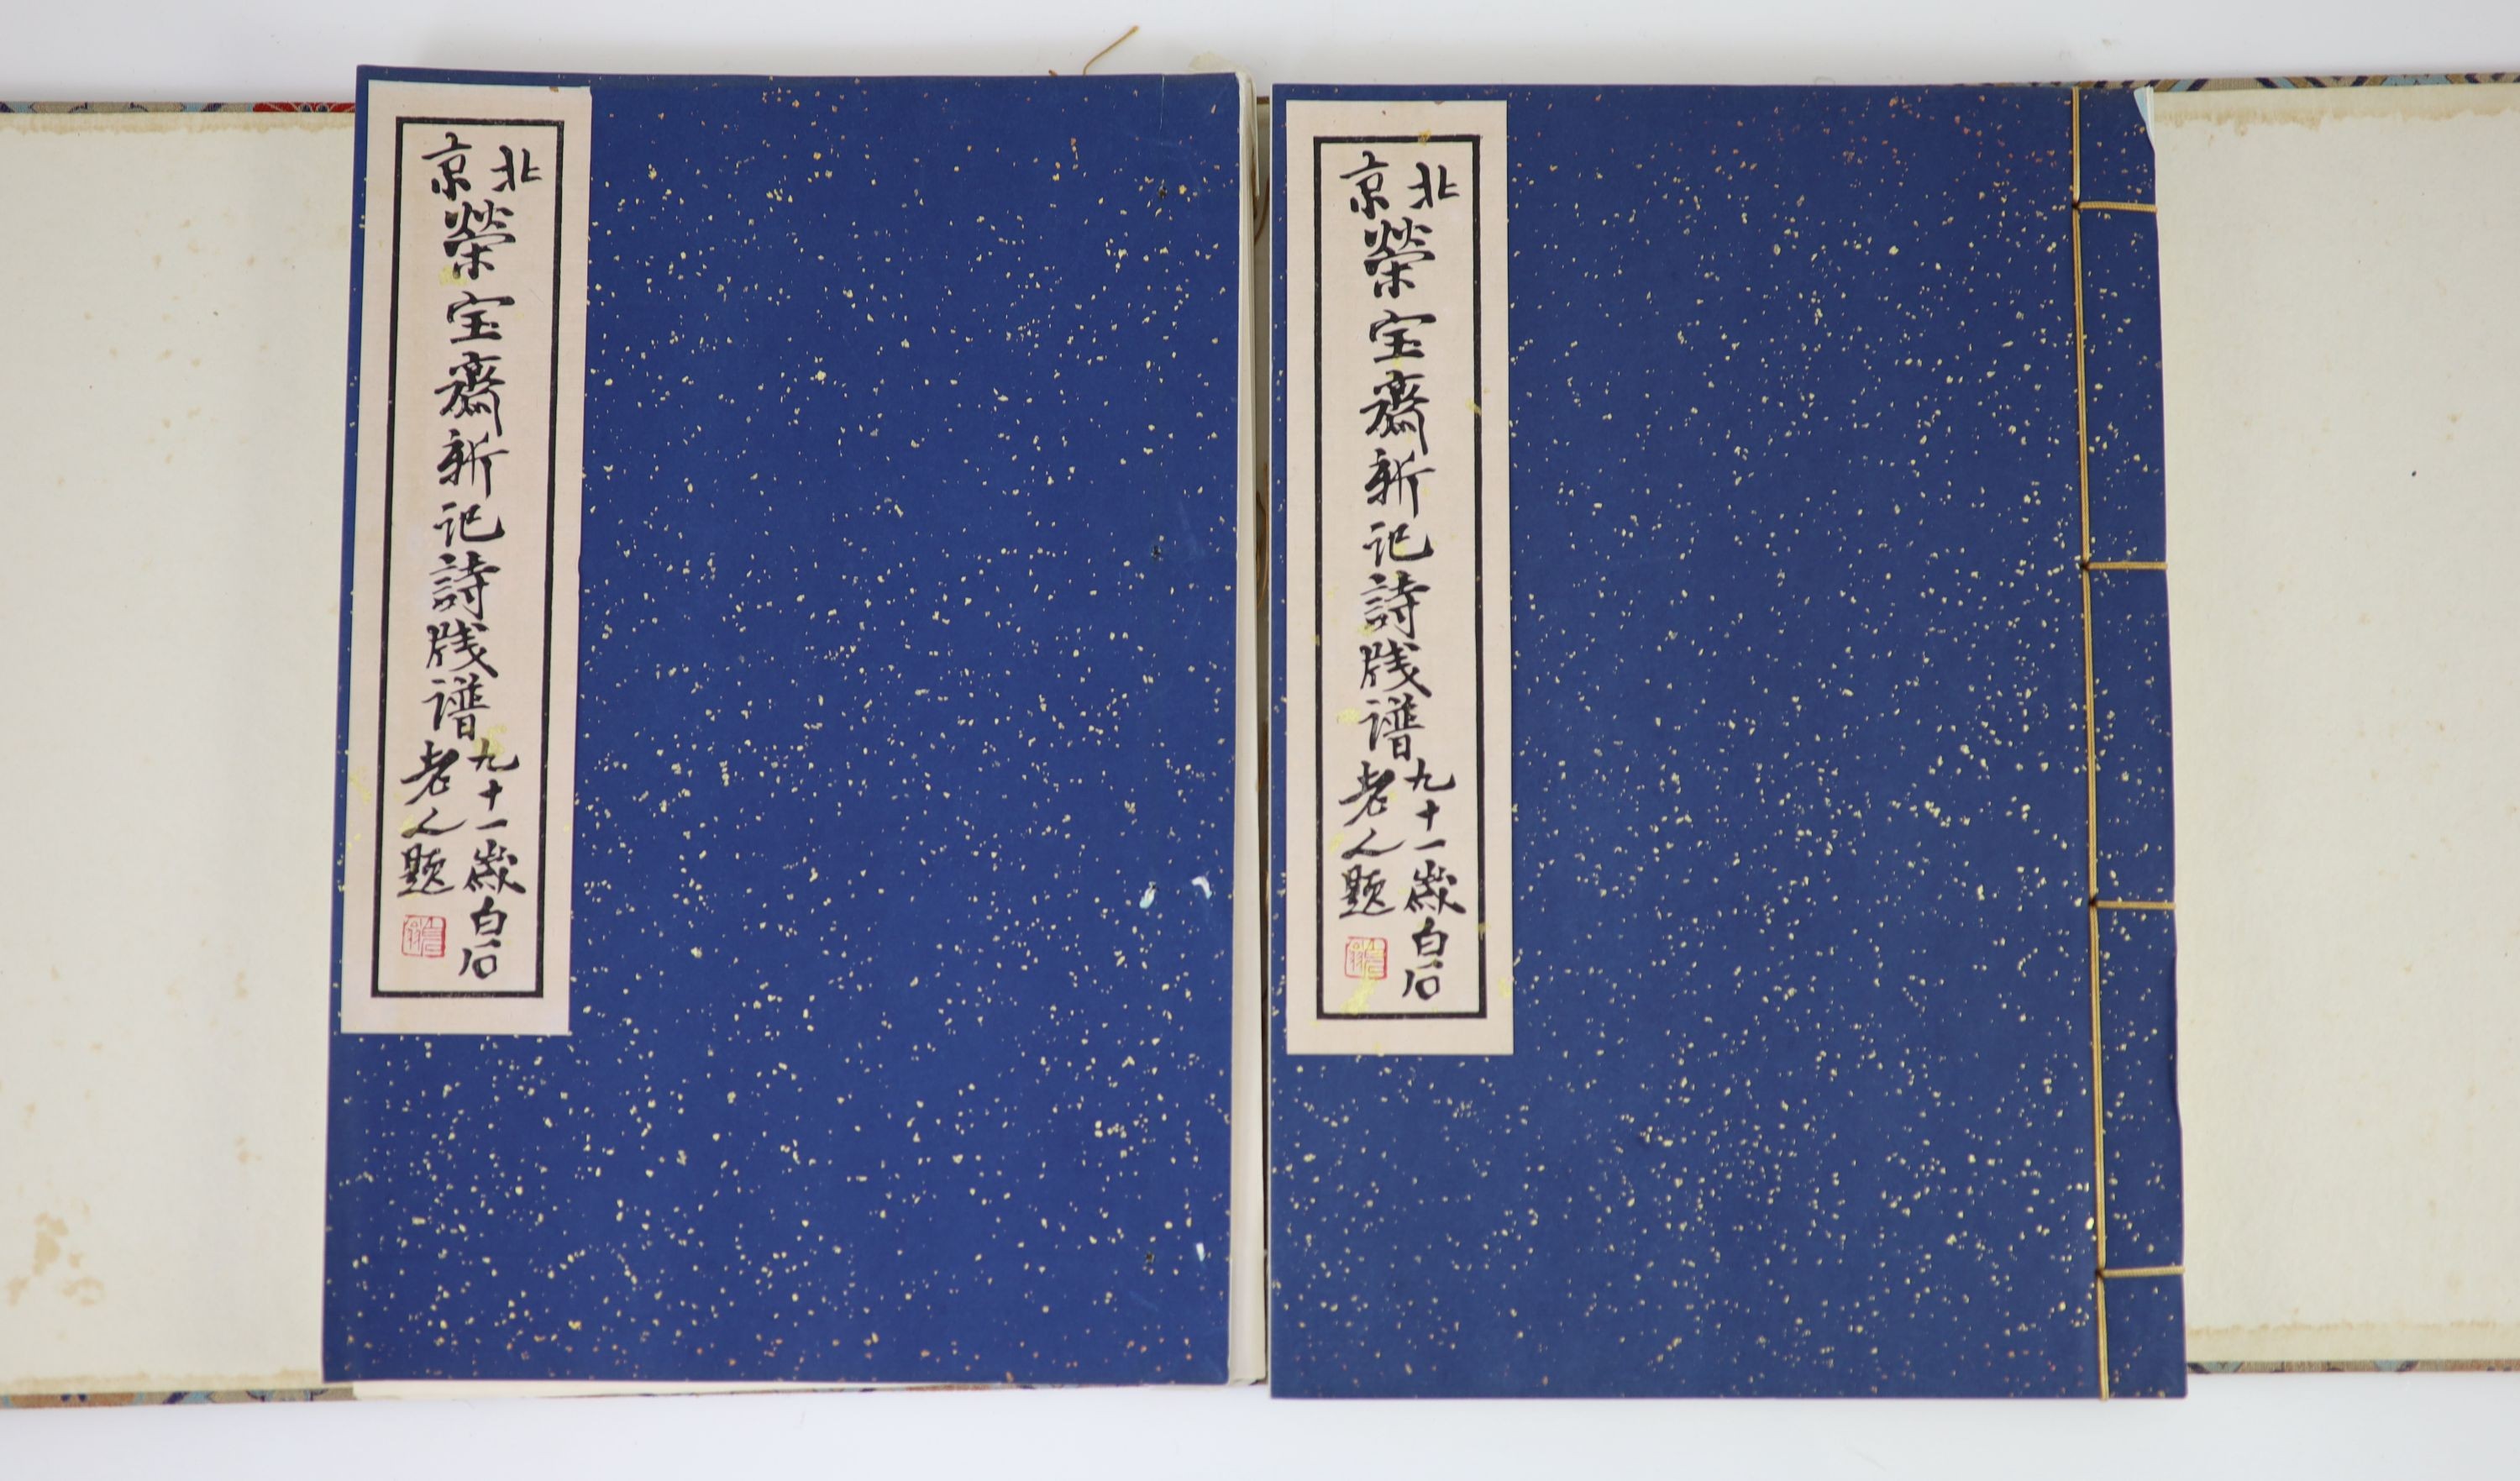 'The Beijing Rong Bao Zhai Shi Jianpu Poetry Book, with woodblock illustrations by famous artists including Qi Baishi, decorative brocade case